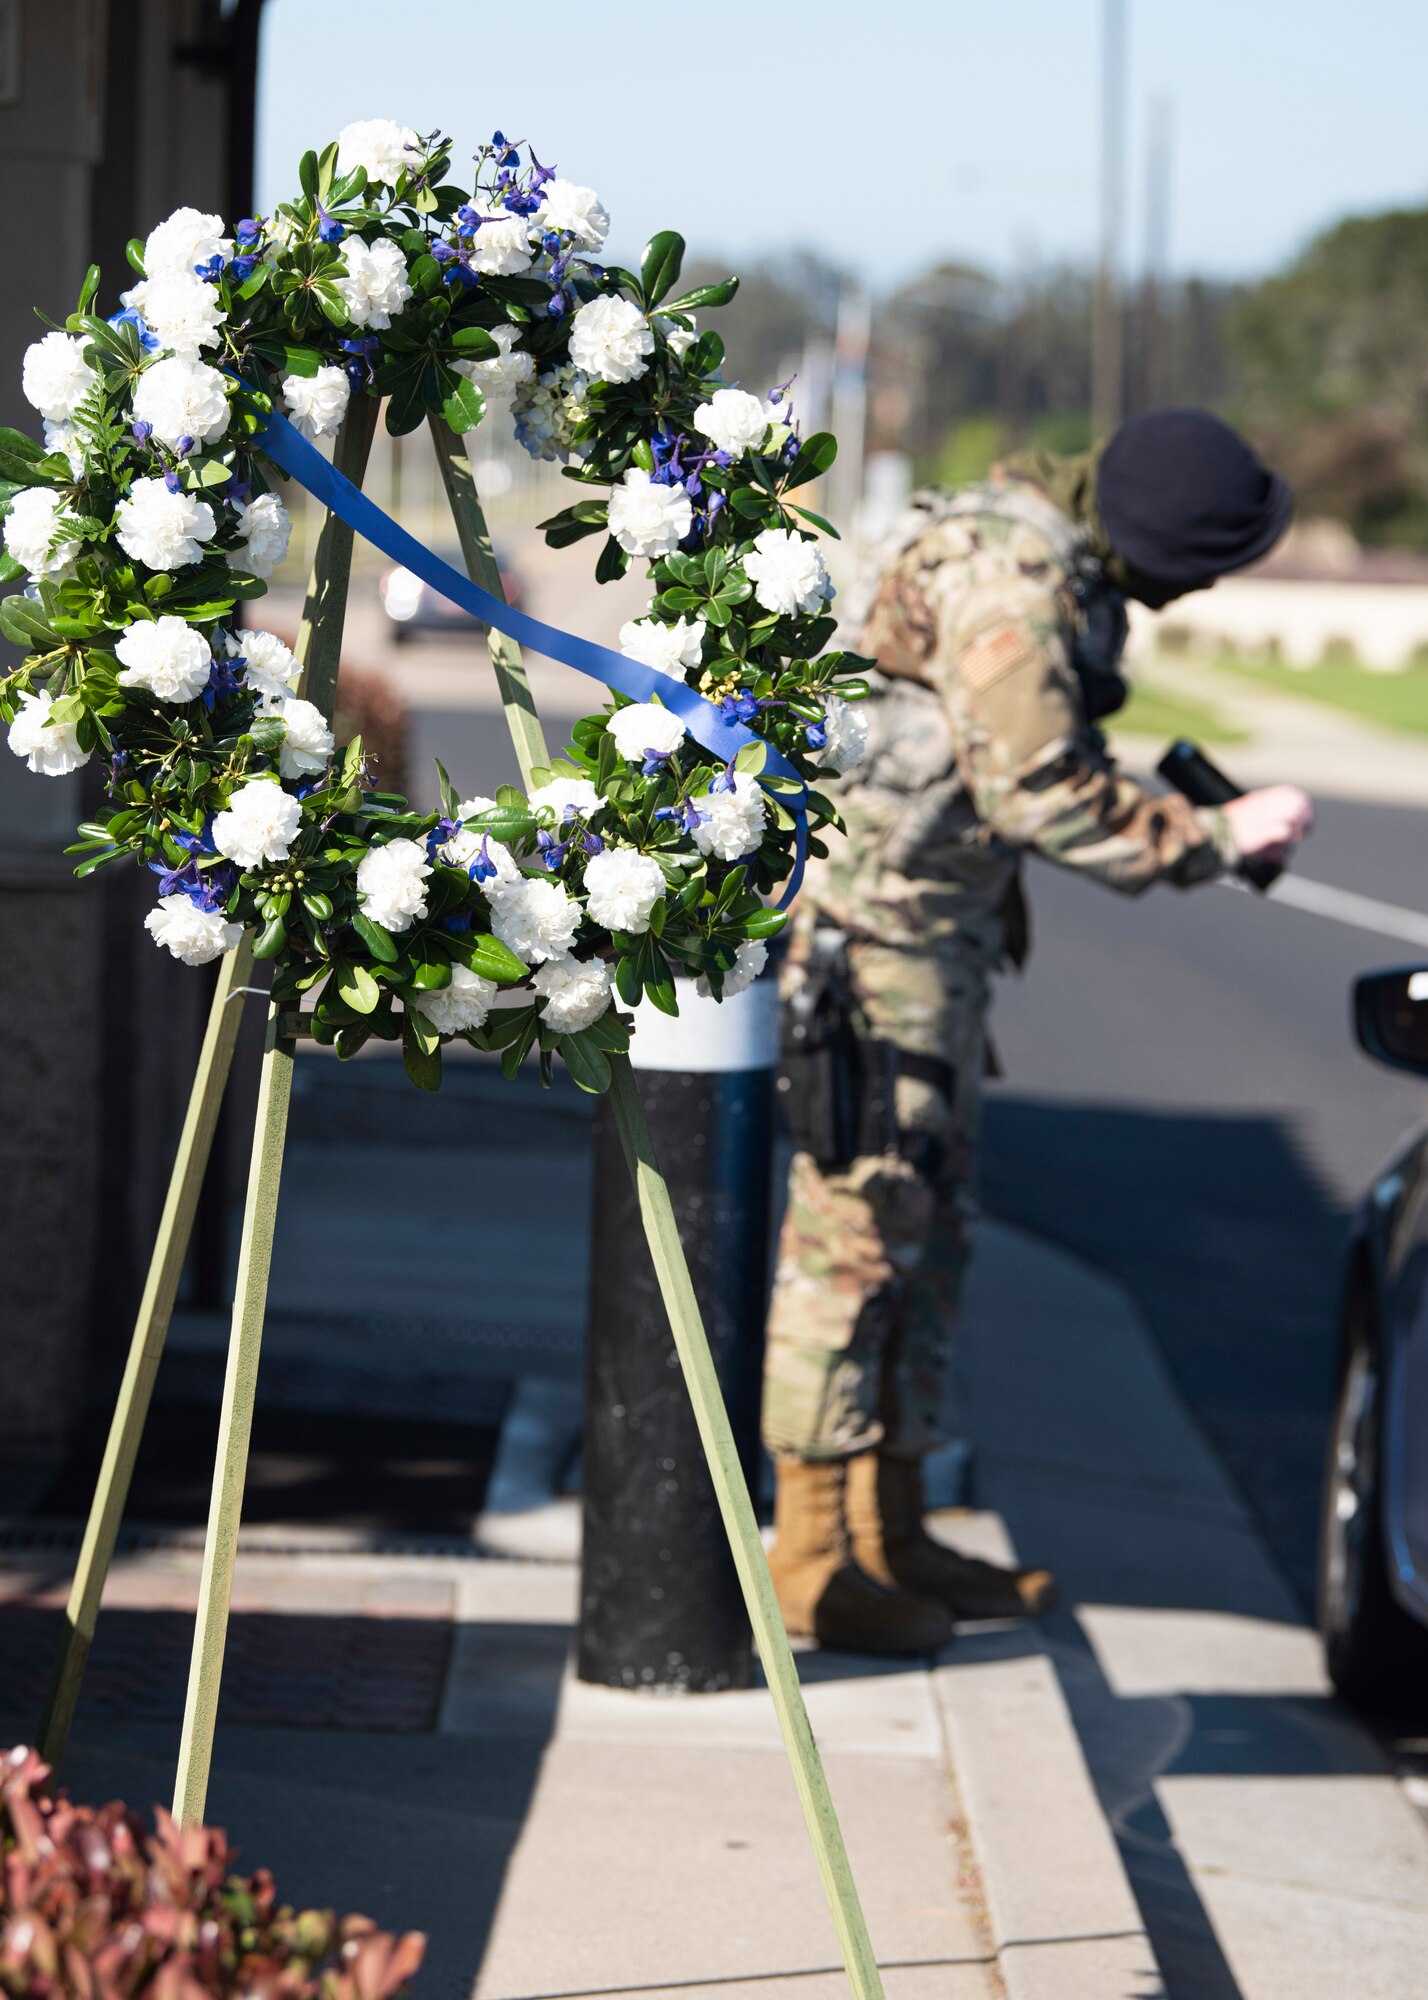 A wreath sits at the main gate in honor of Police Week May 11, 2020, at Vandenberg Air Force Base, Calif. In celebration of National Police Week, which is celebrated in recognition of law enforcement officers who have lost their lives in the line of duty, a wreath was placed at the front gate and the Base Exchange. A memorial with a book of fallen defenders was also displayed in the Exchange to honor their stories and history. (U.S. Air Force photo by Senior Airman Hanah Abercrombie)